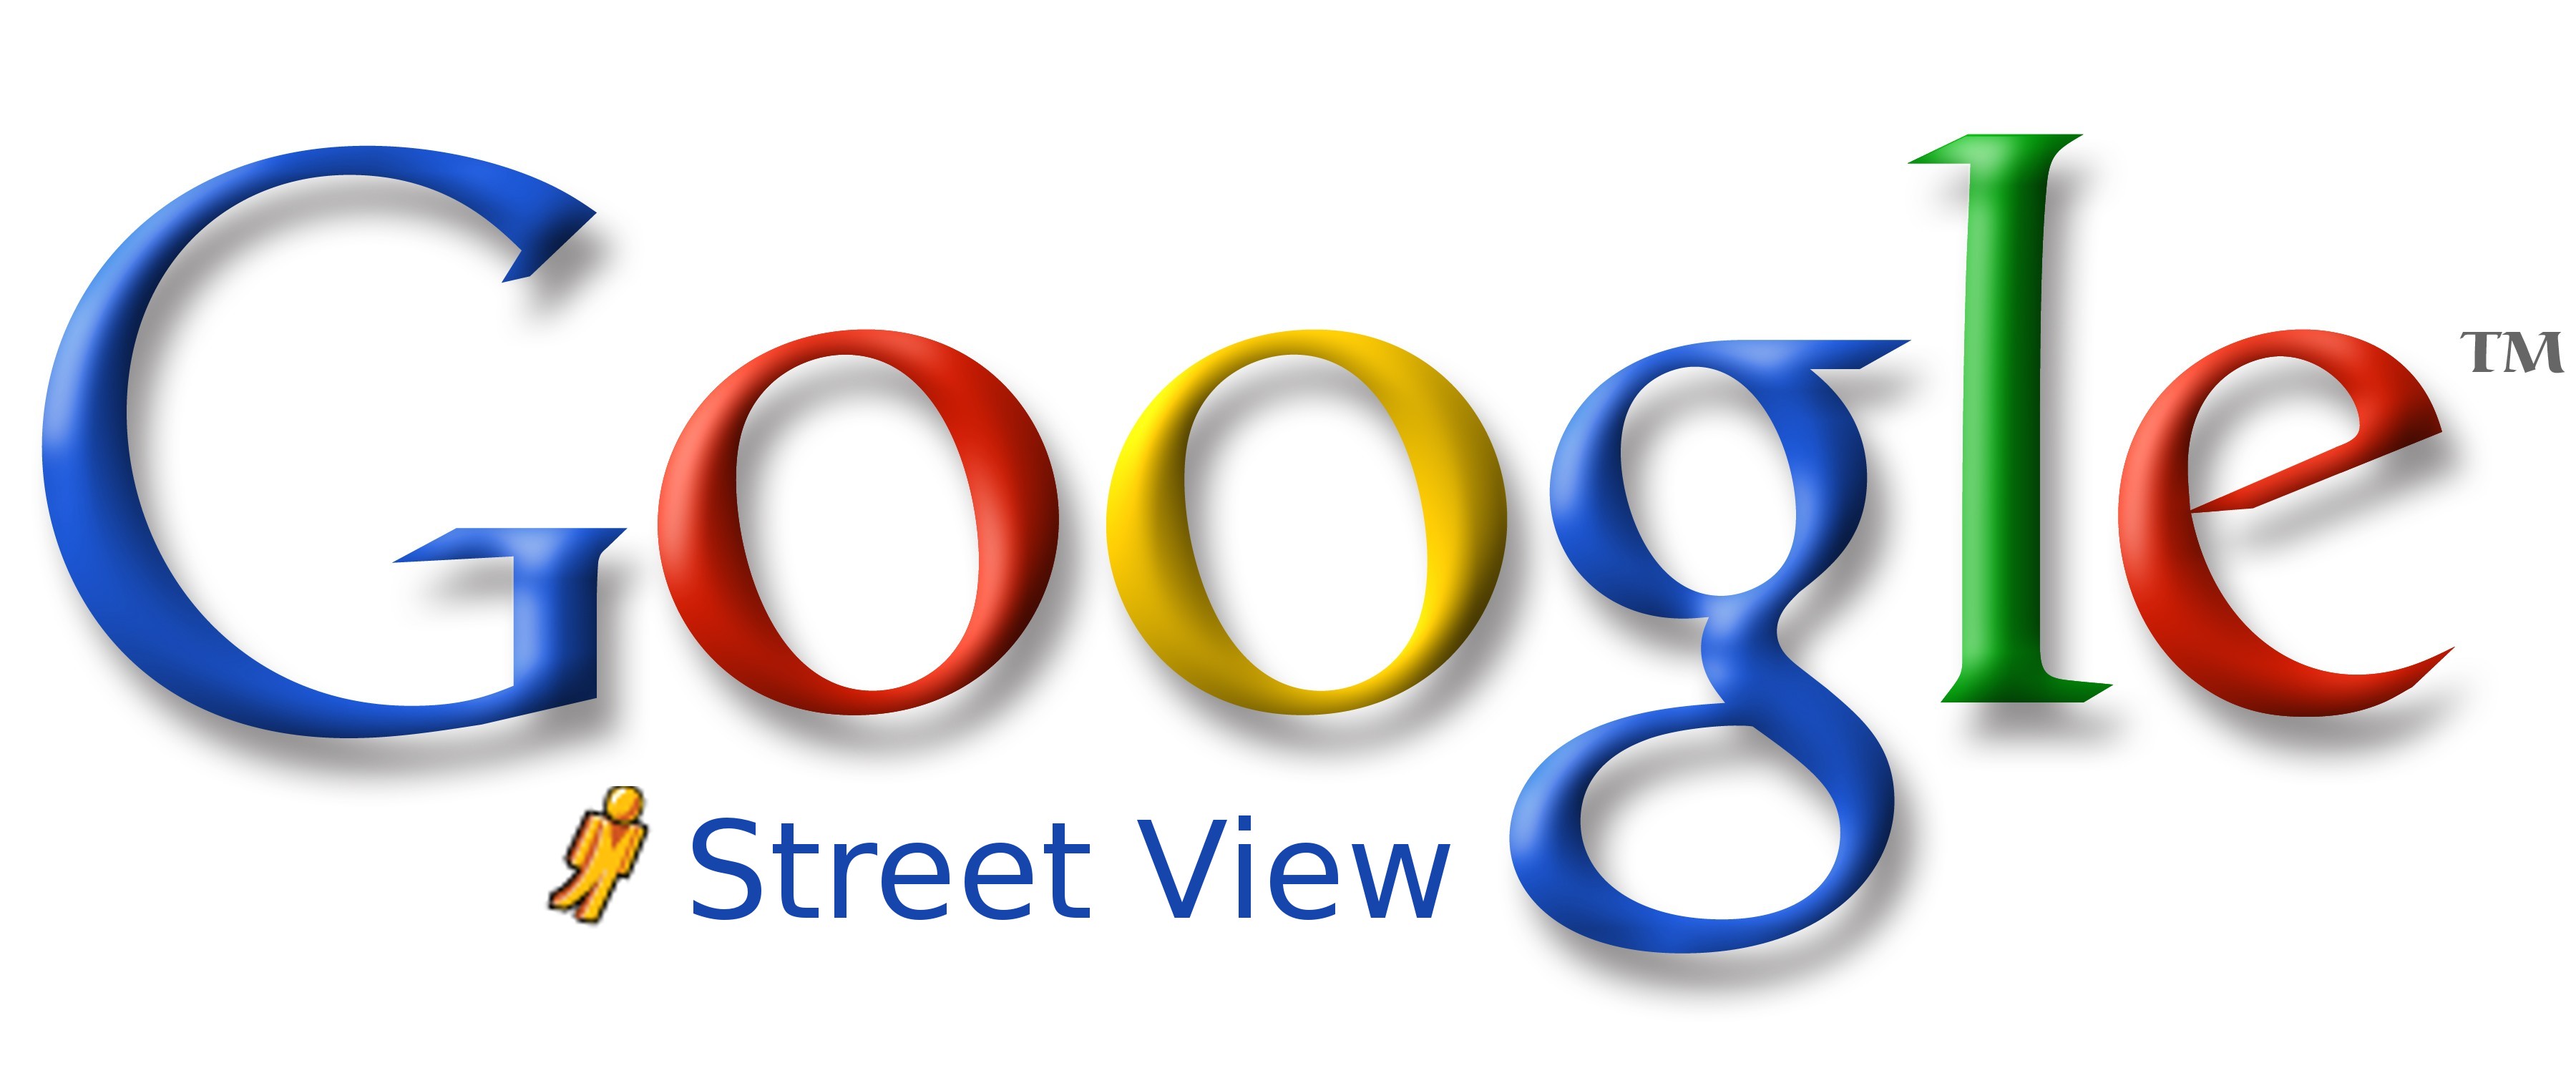 Google Street View was first launched in 2007